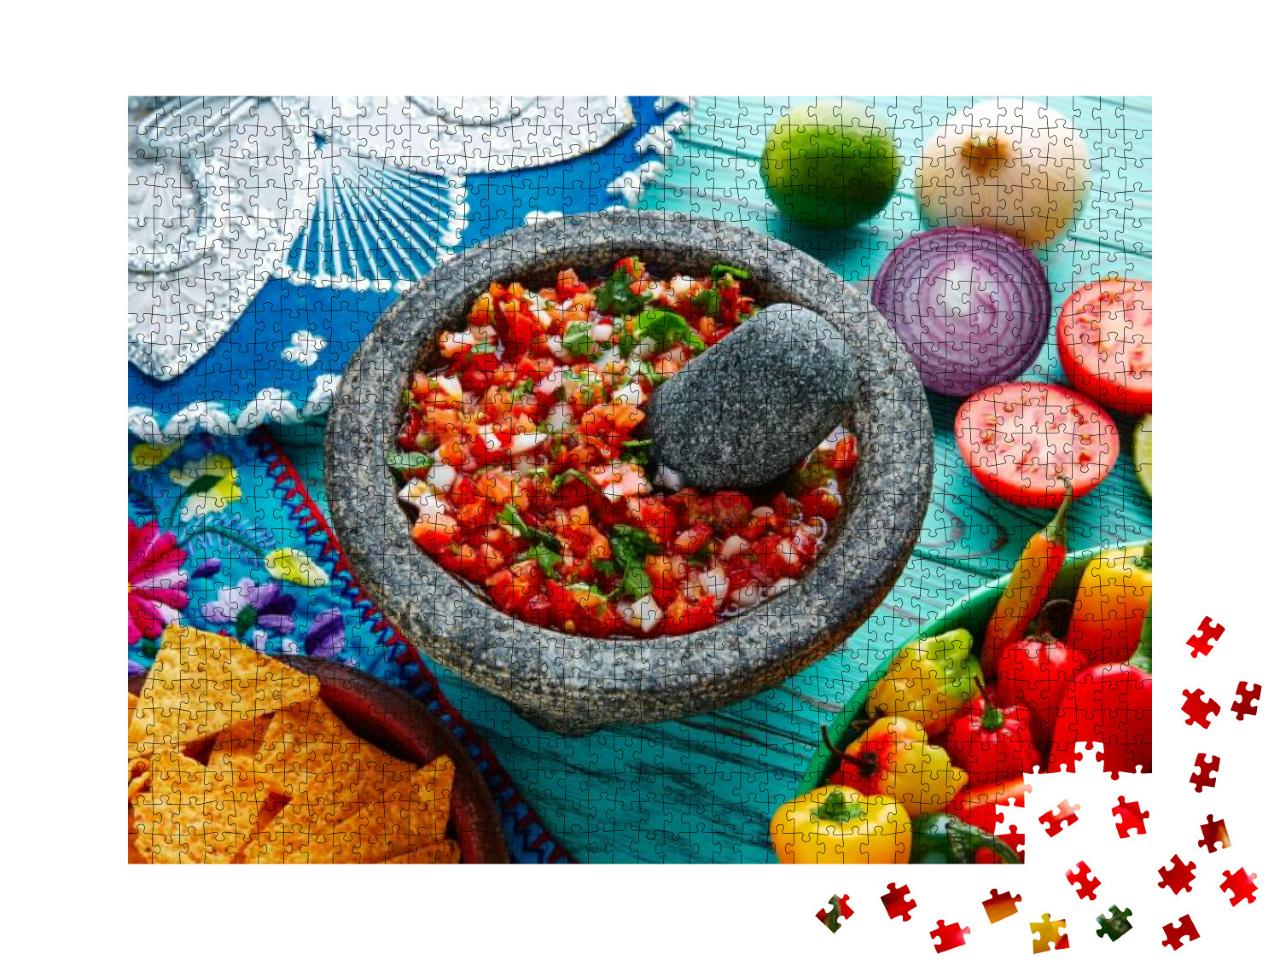 Pico De Gallo Sauce from Mexico with Tomato Cilantro & On... Jigsaw Puzzle with 1000 pieces